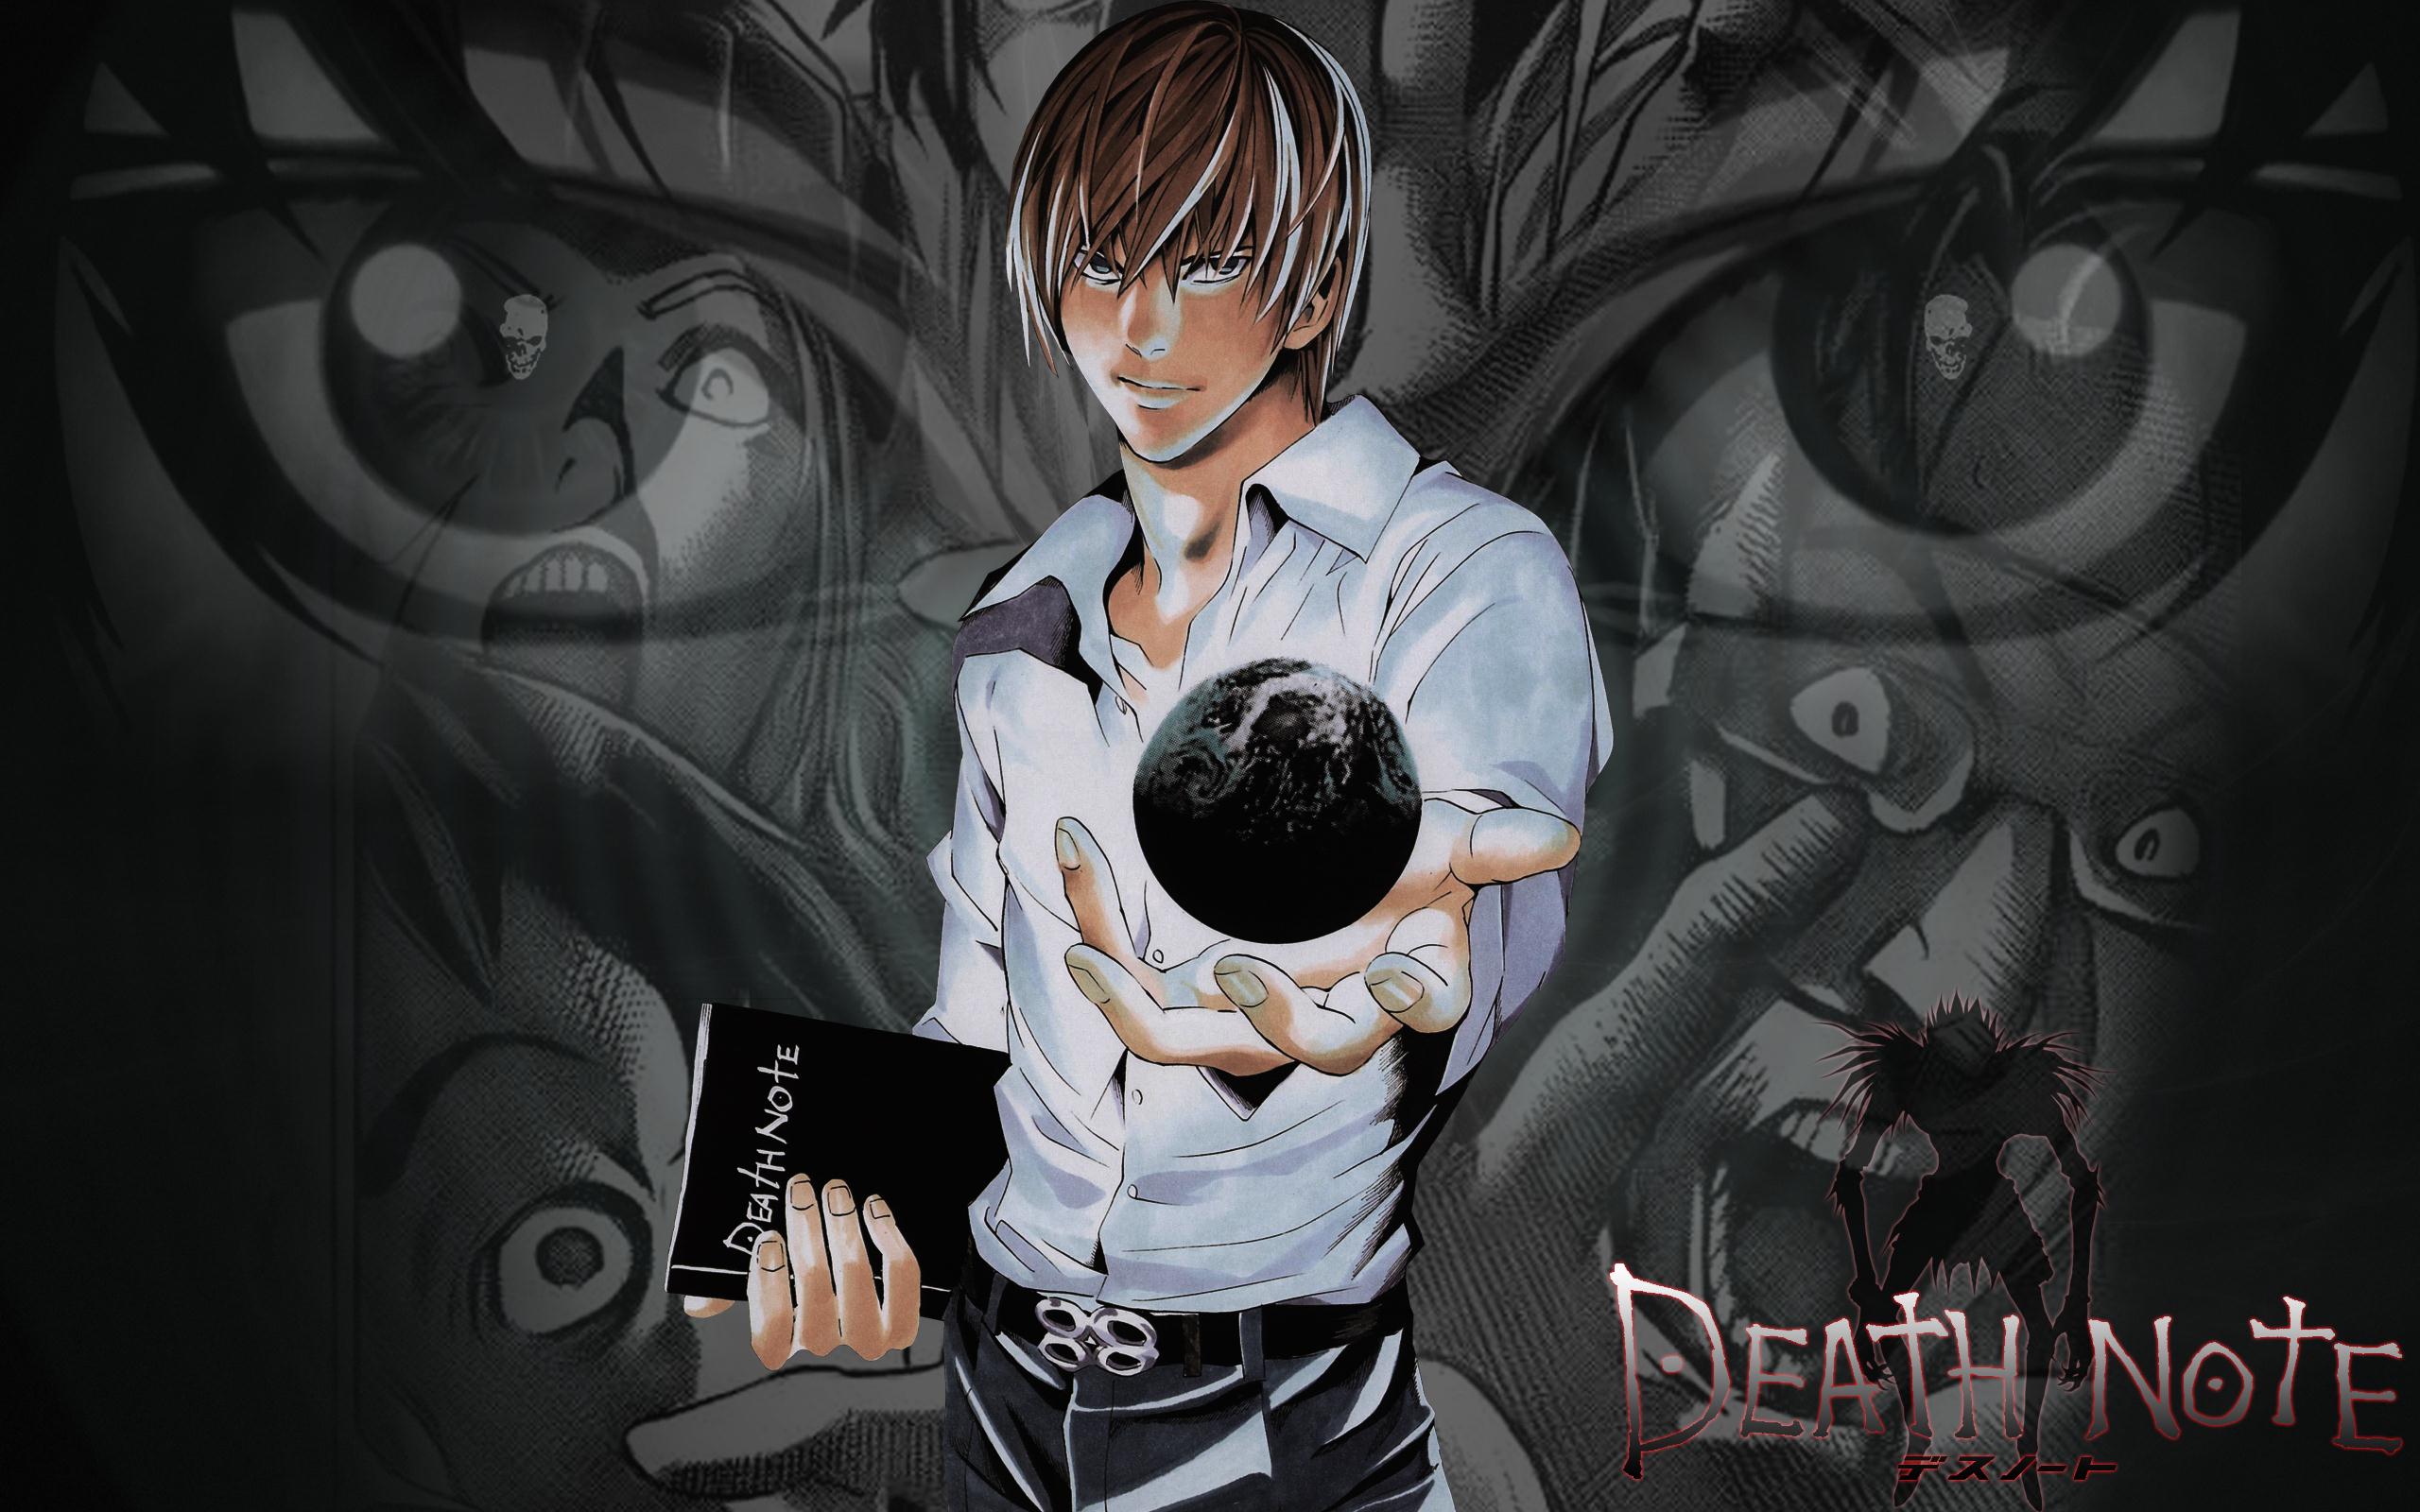 Light Yagami, the protagonist from Death Note, stares intensely in this striking anime artwork.